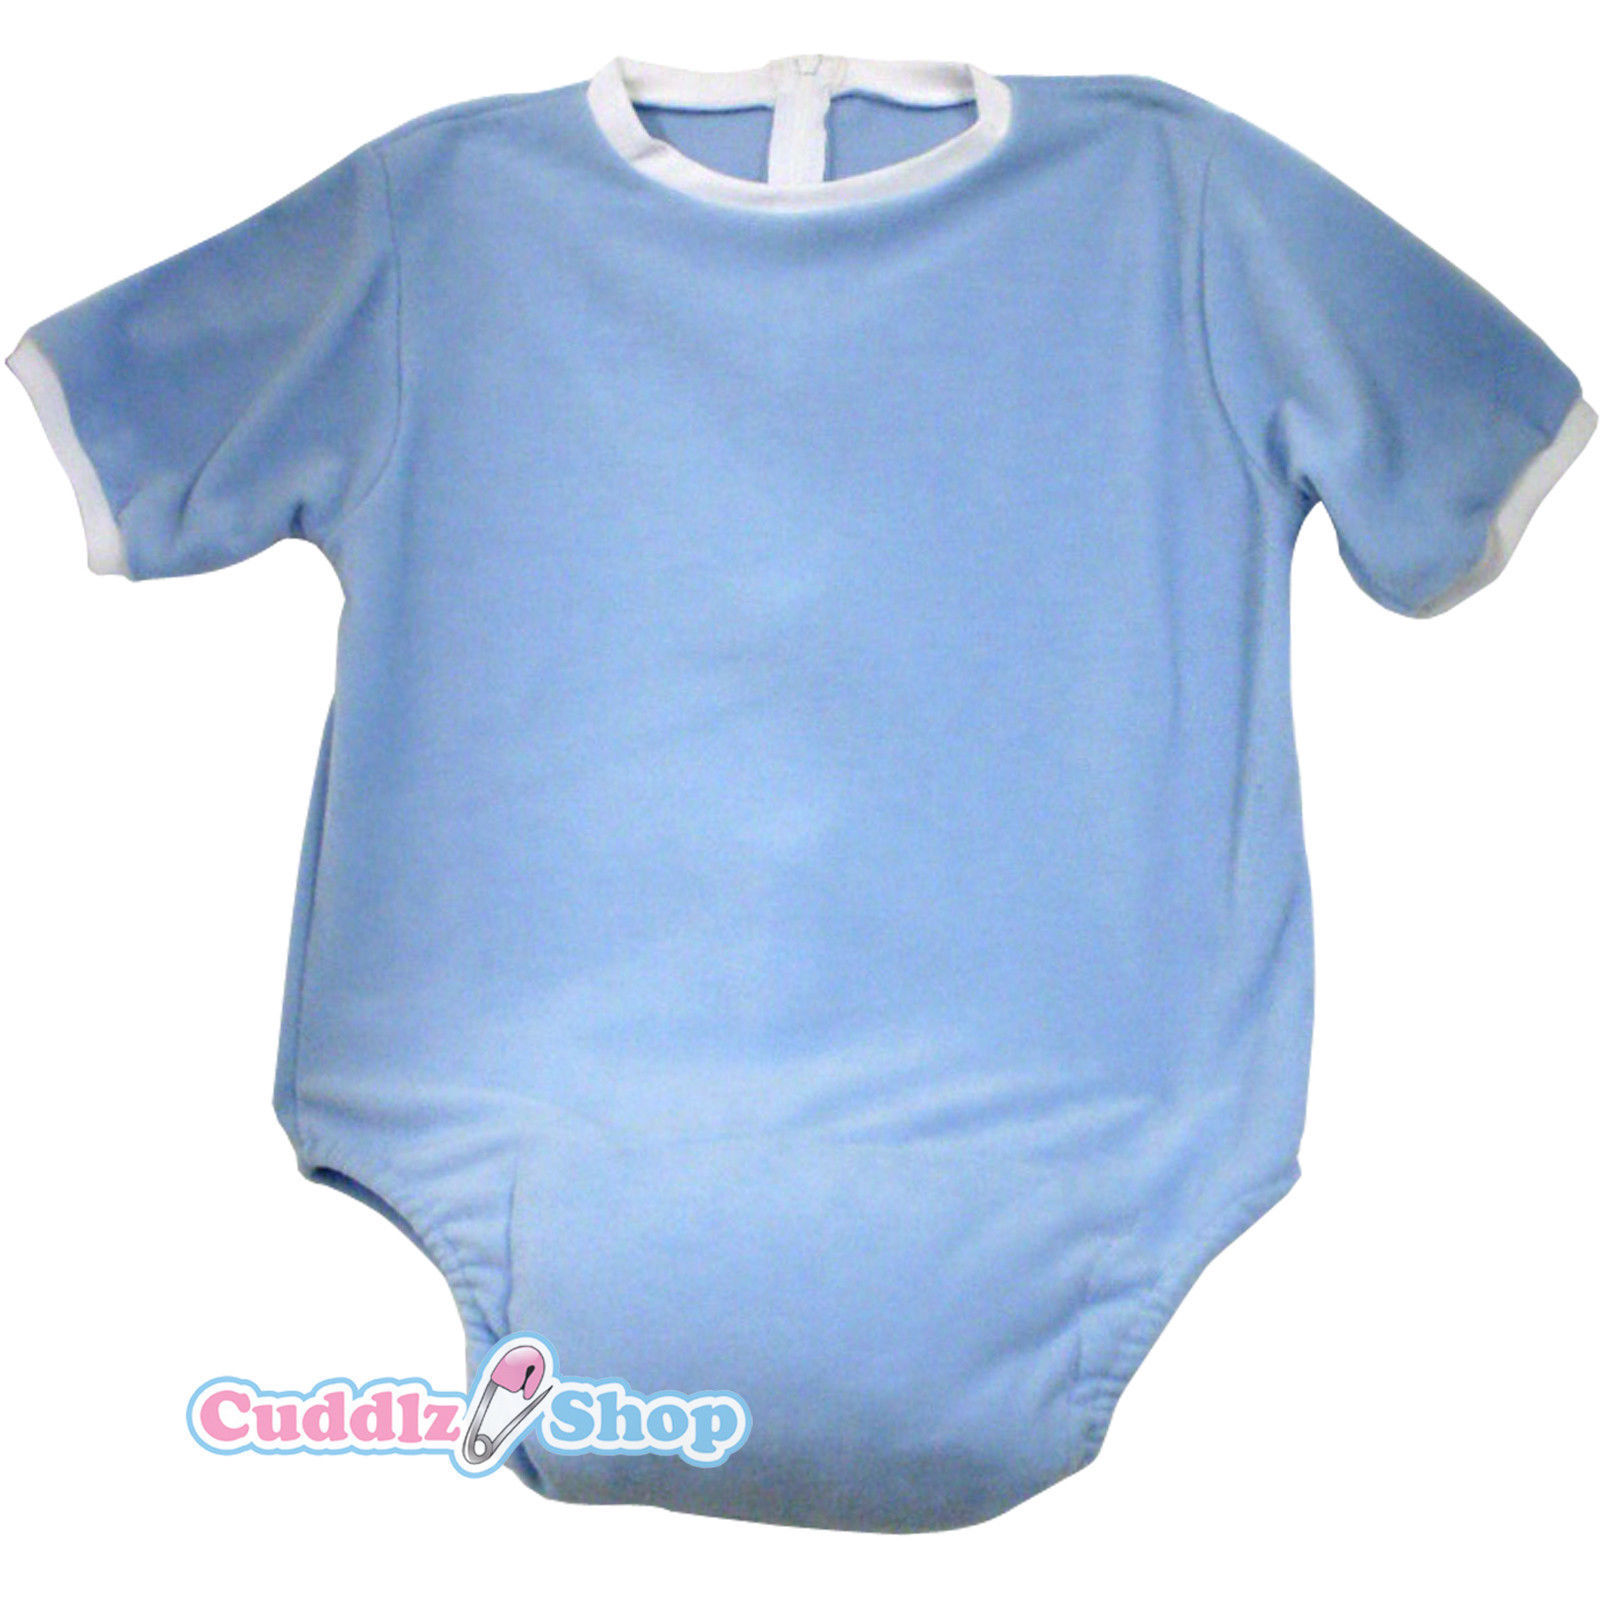 Cuddlz Adult Waddle Romper ABDL Baby Grow Padded Body Suit